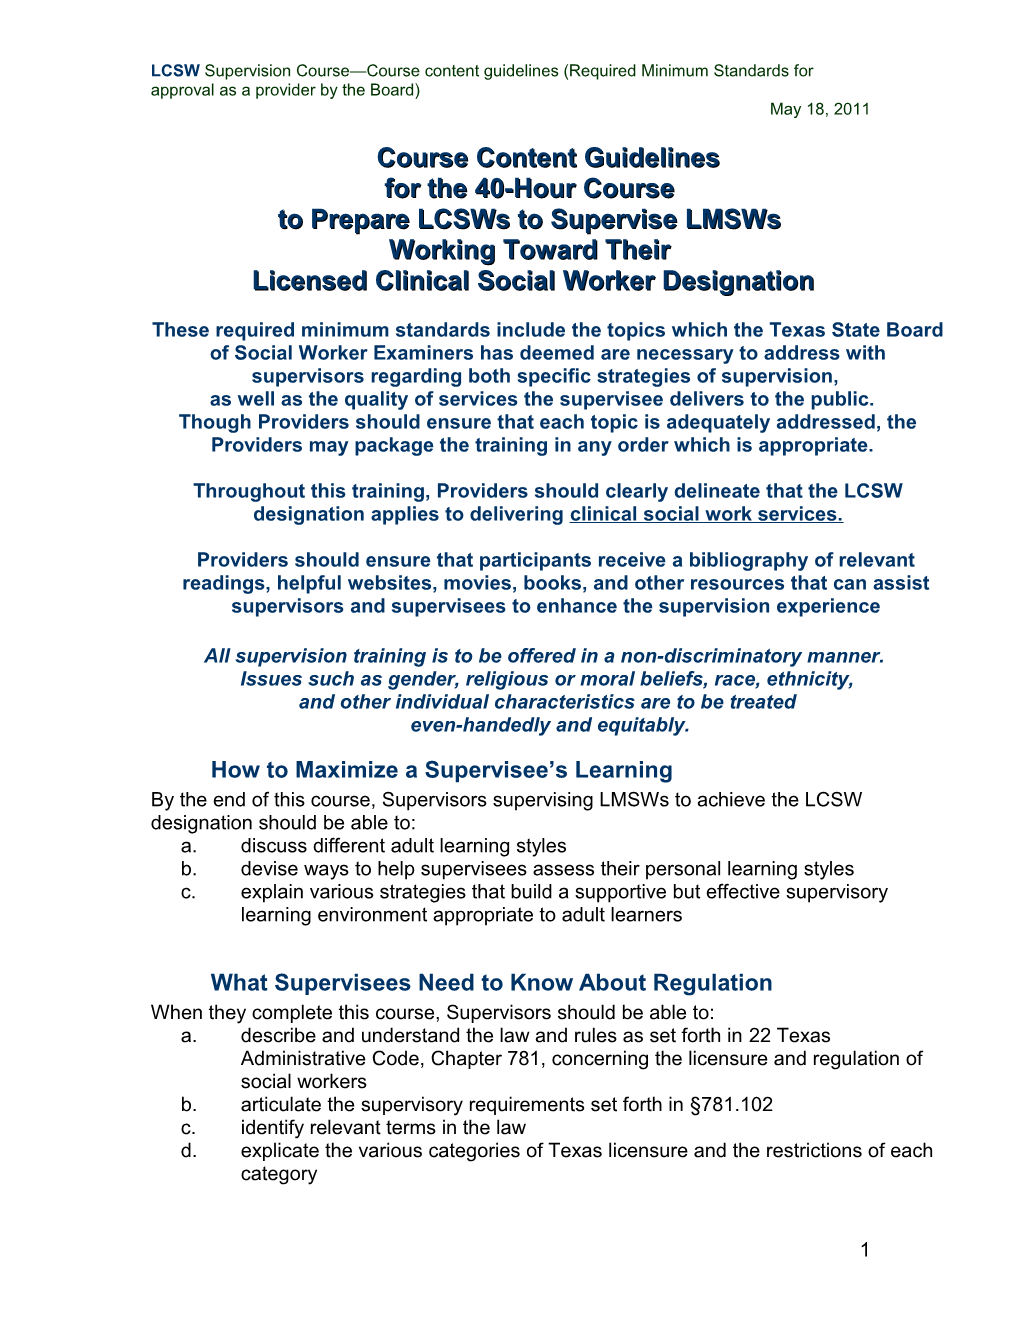 Course Content Guidelines (Minimum Requirements) for LCSW 2011